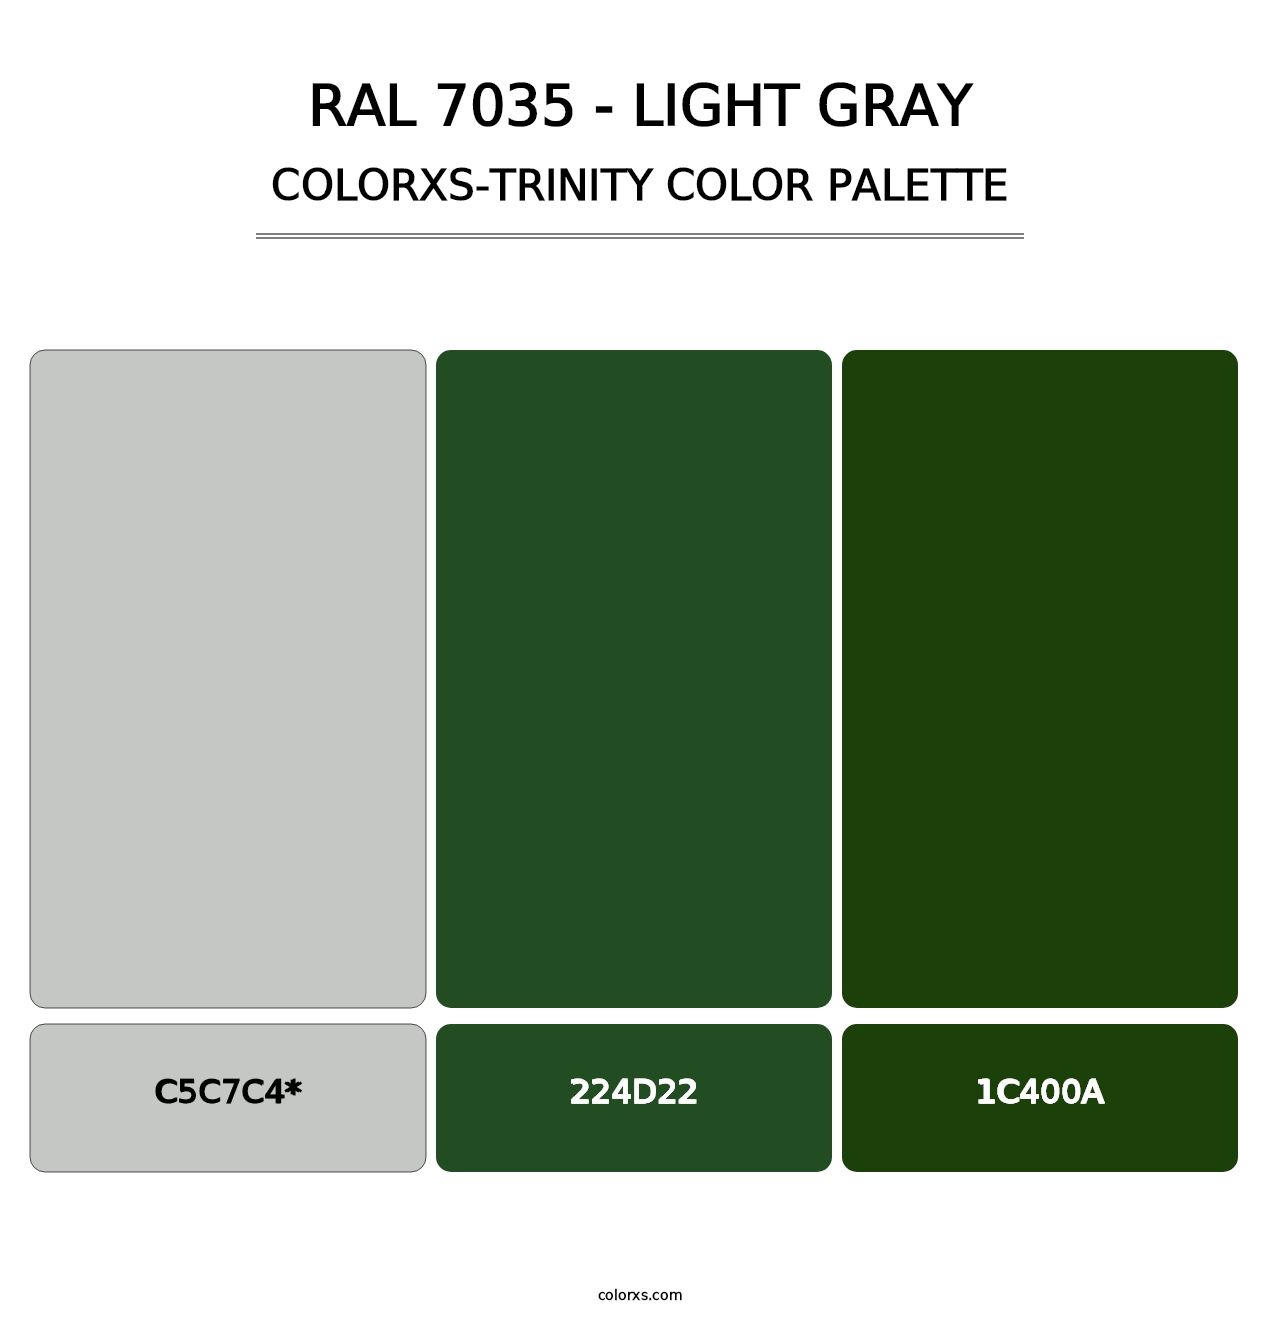 RAL 7035 - Light Gray - Colorxs Trinity Palette